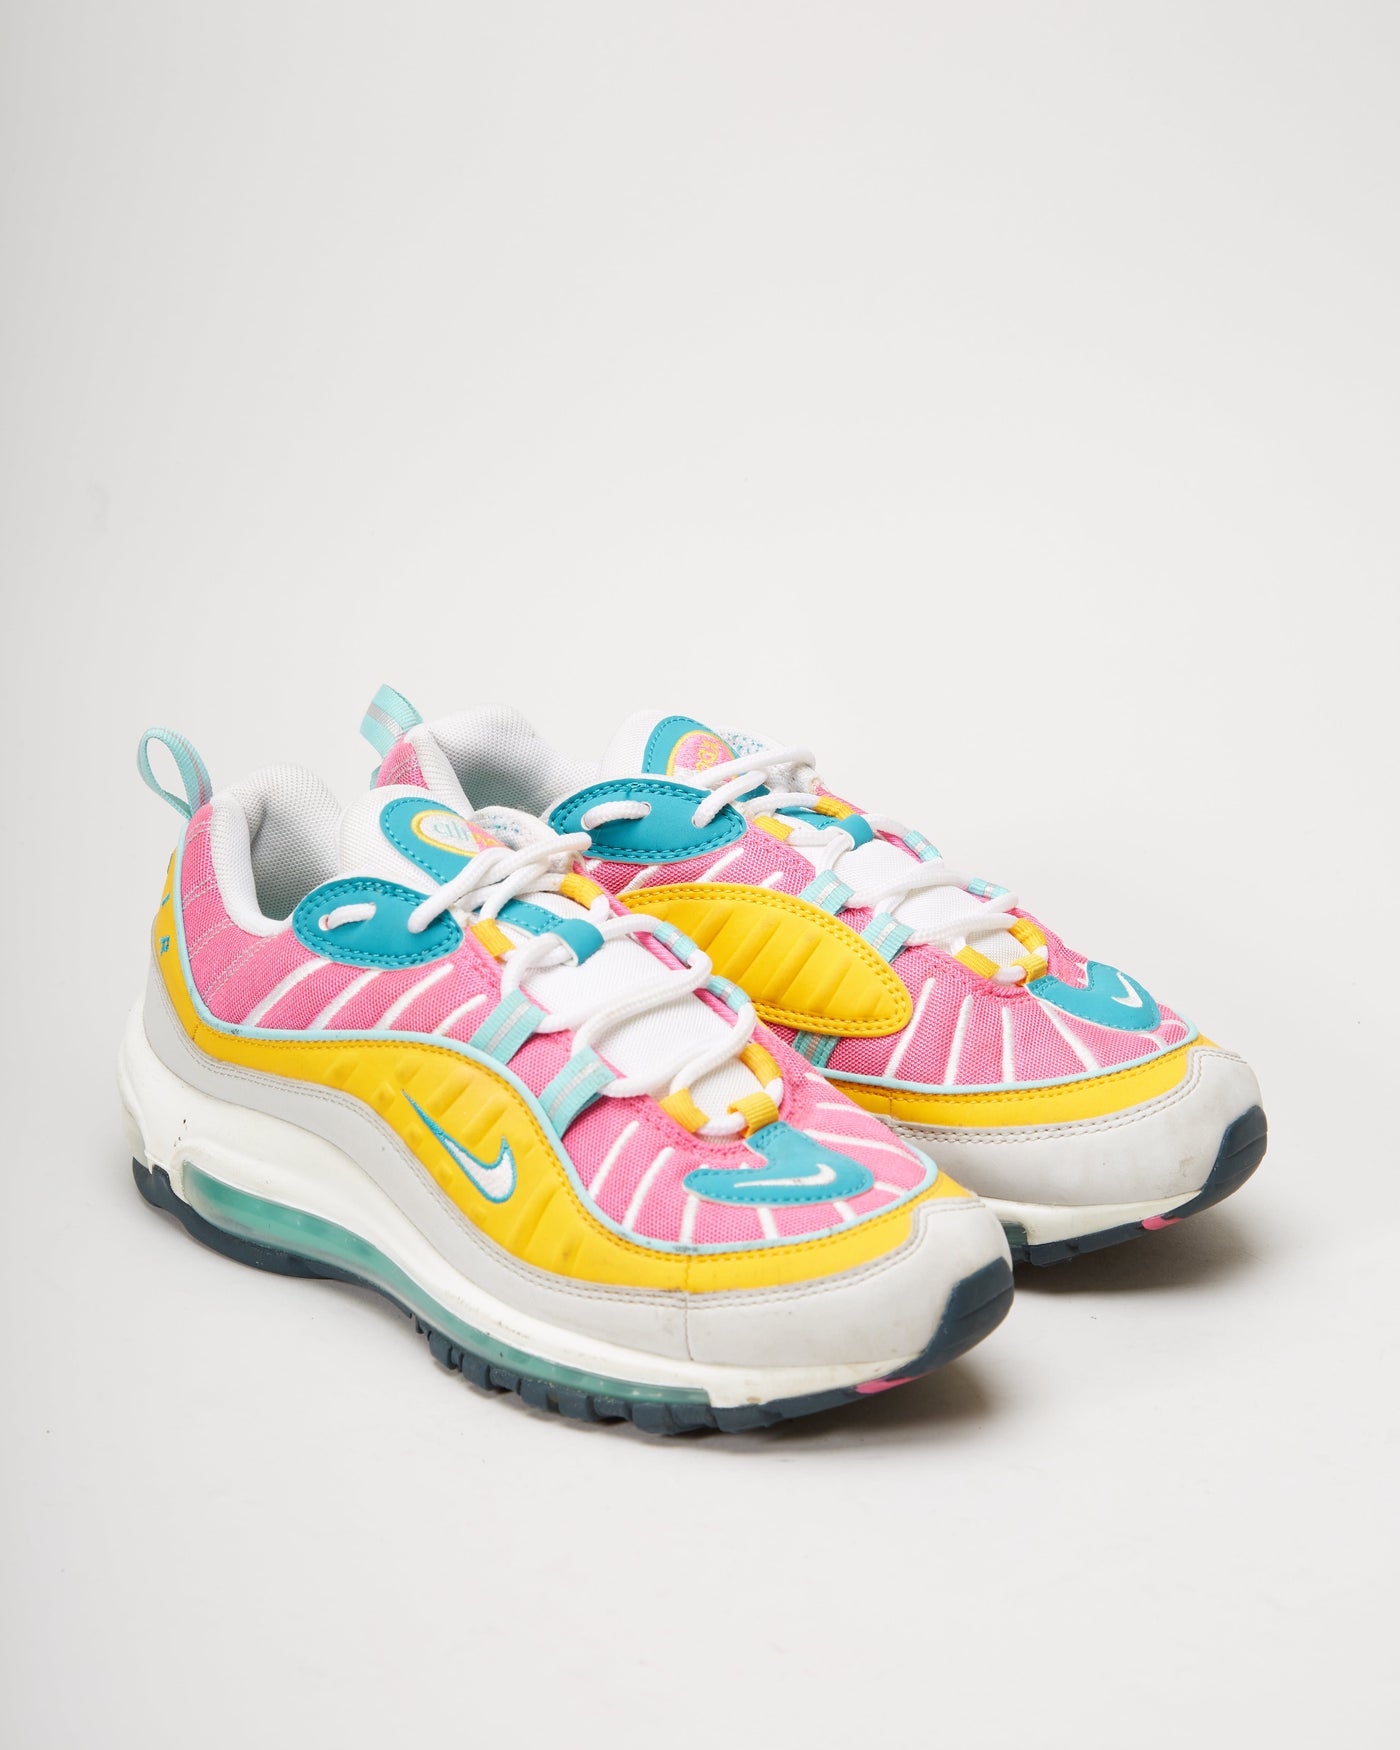 2019 Nike Air Max 98 Easter Colourway Shoes - UK 5